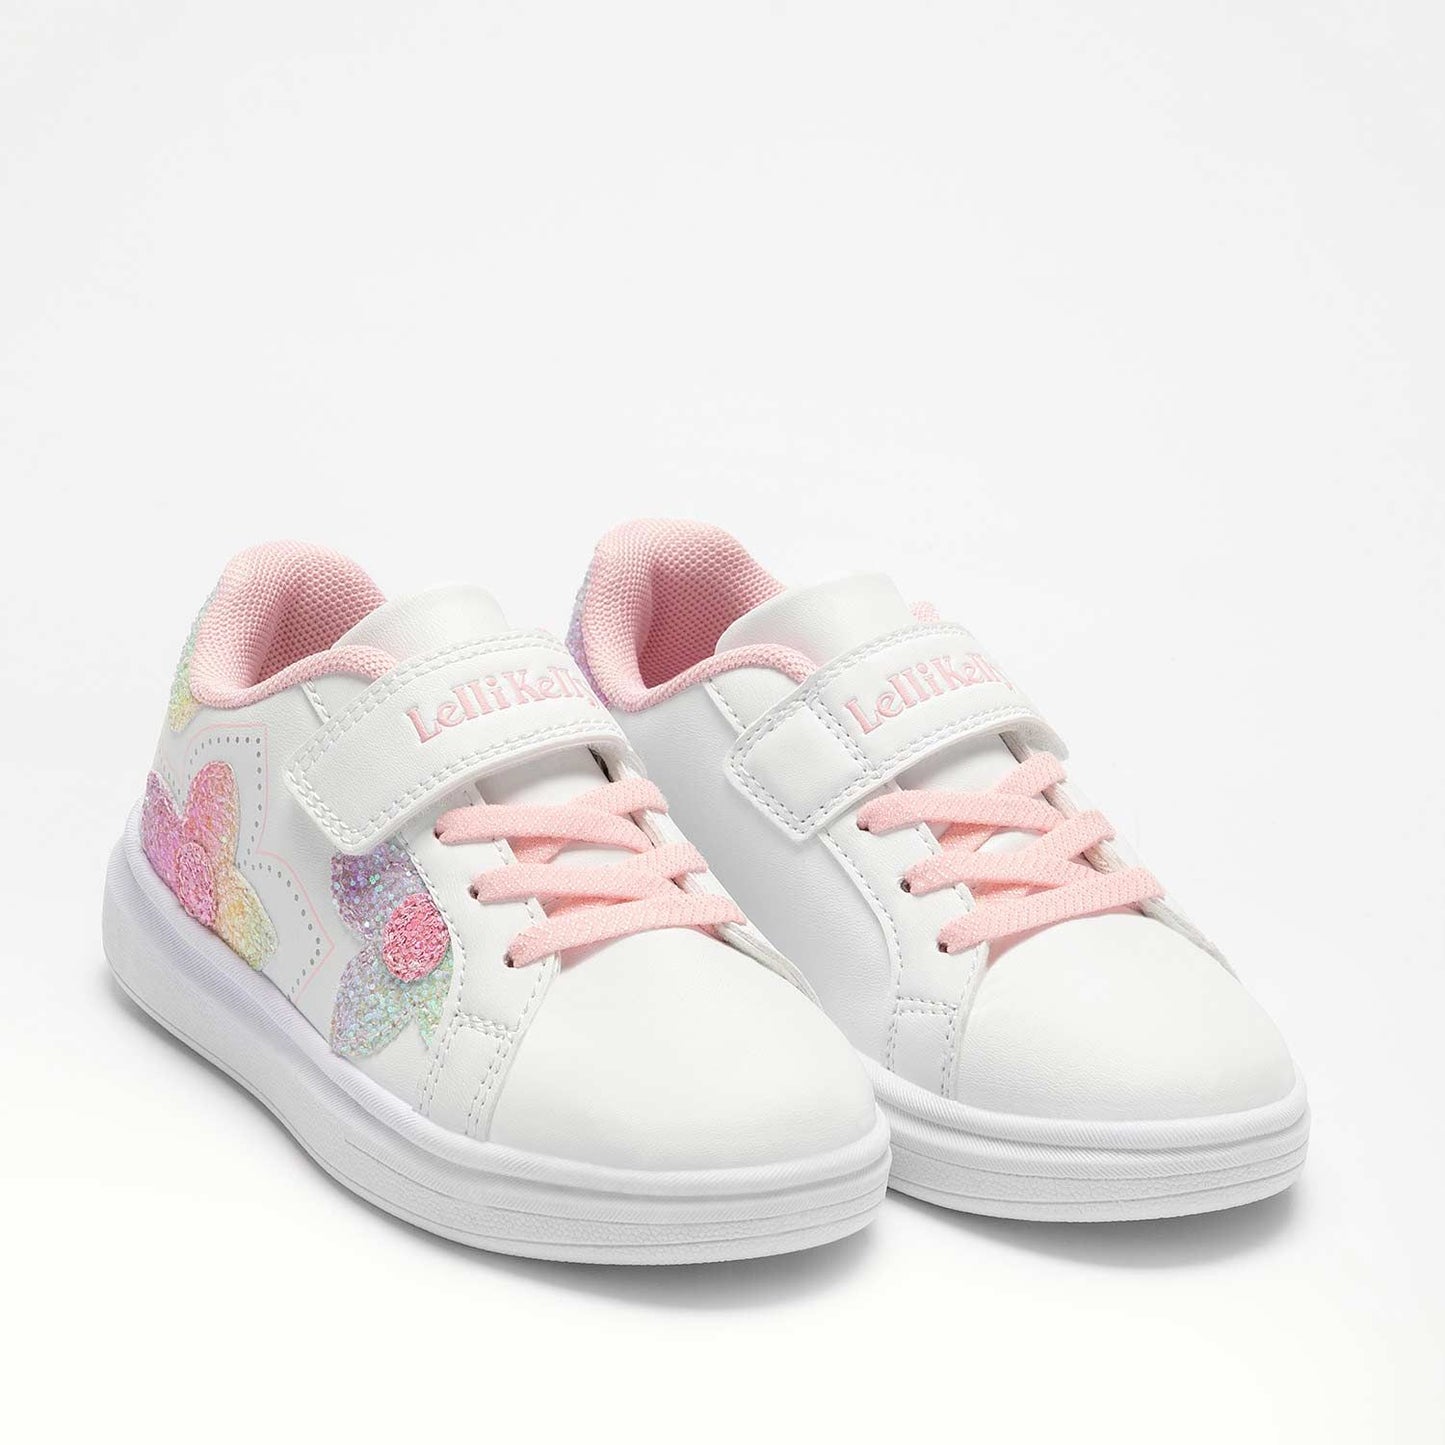 A pair of girls casual trainers by Lelli Kelly, style Anita, in white multi with velcro fastening. Right side view.